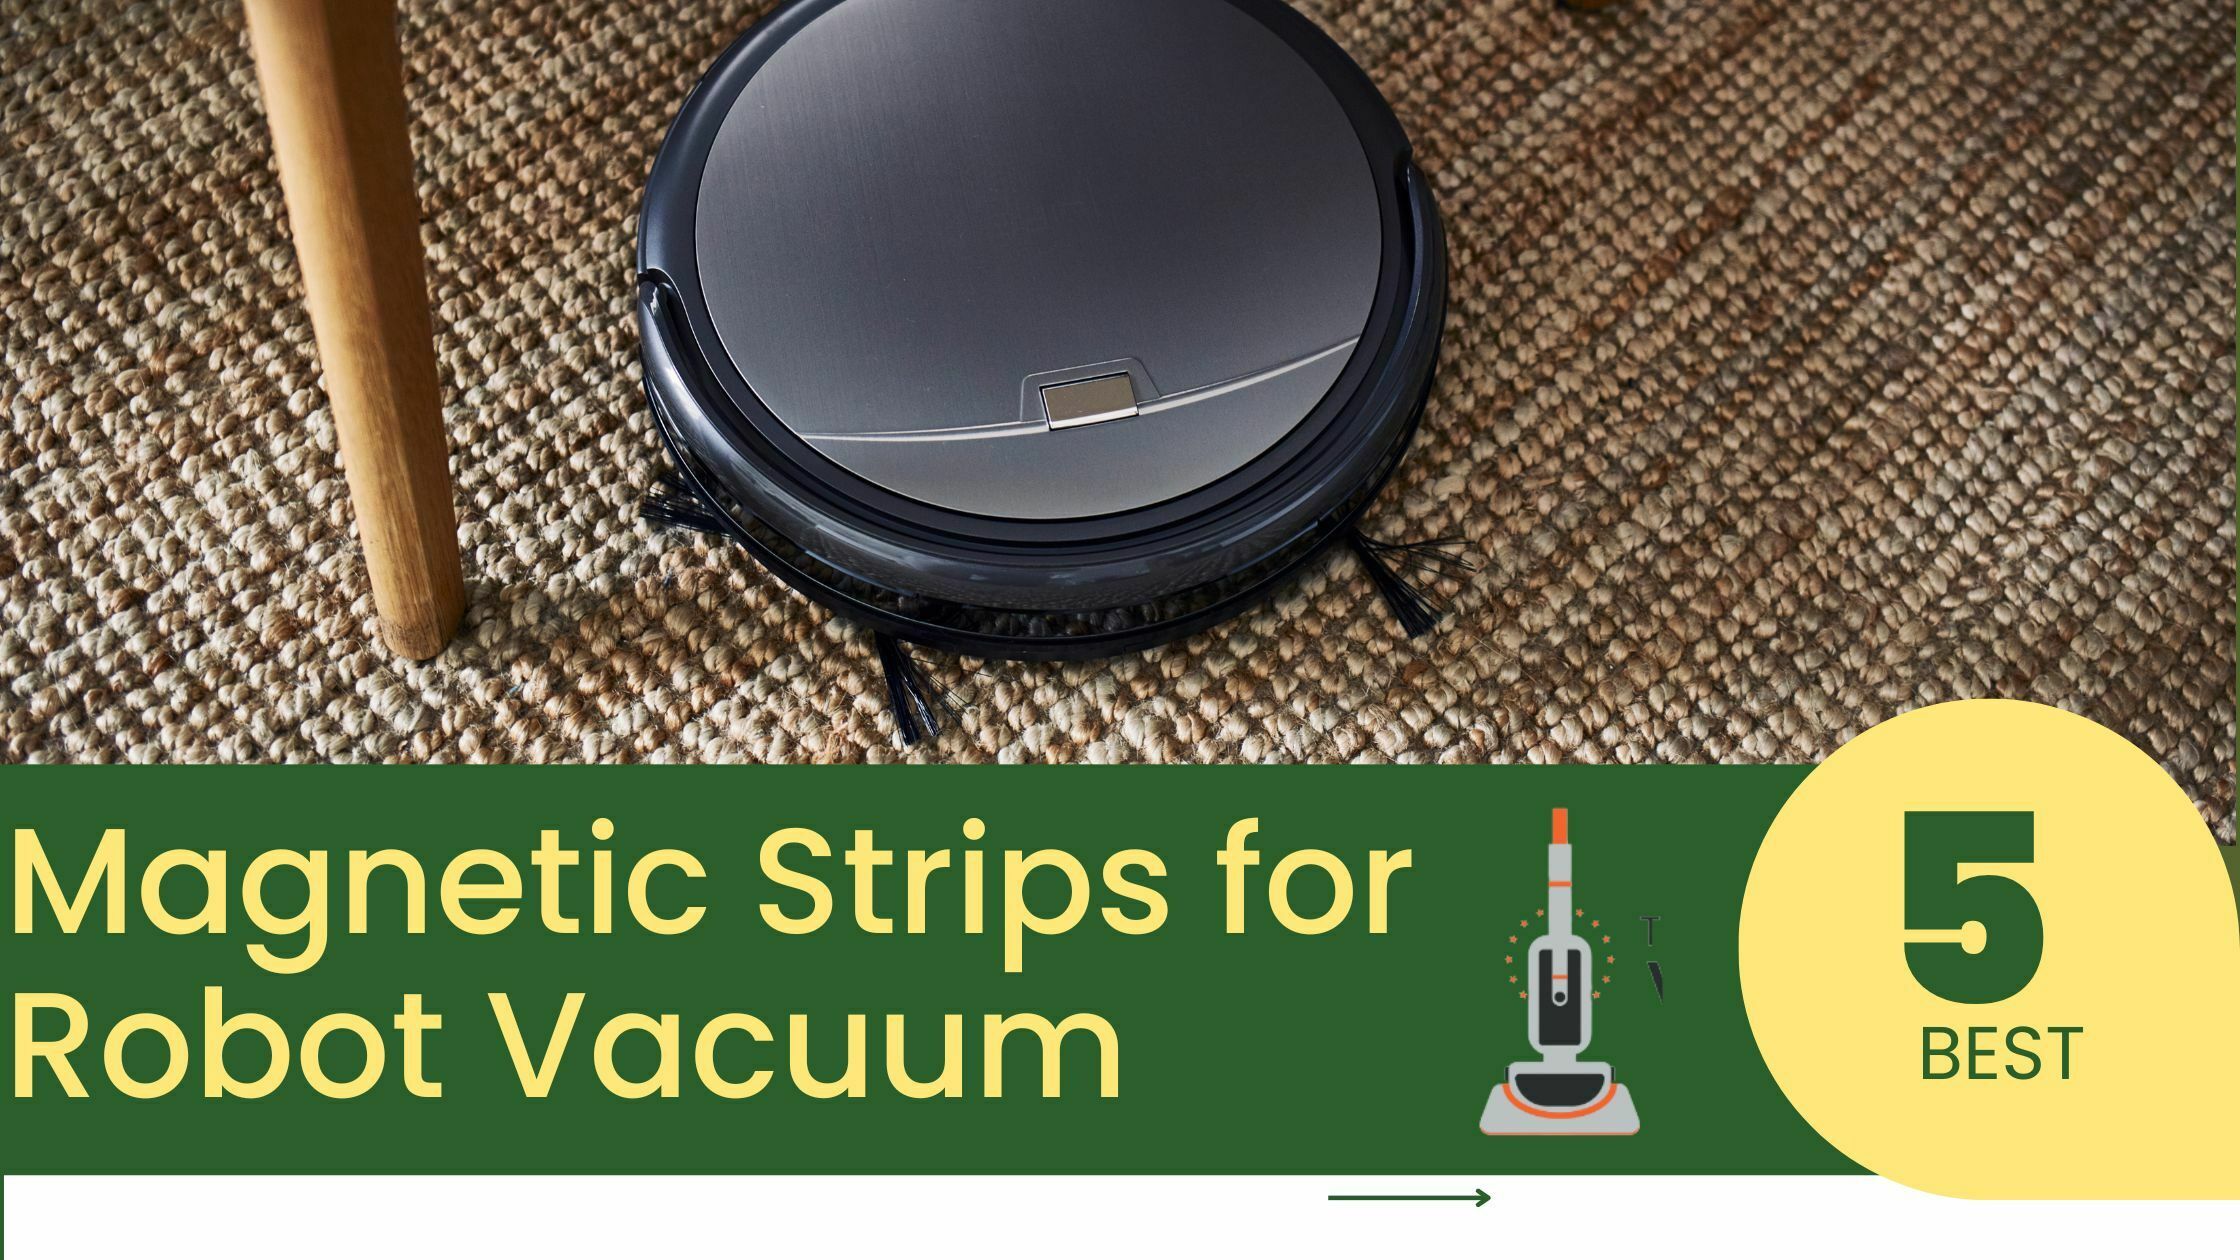 Magnetic Strips for Robot Vacuum